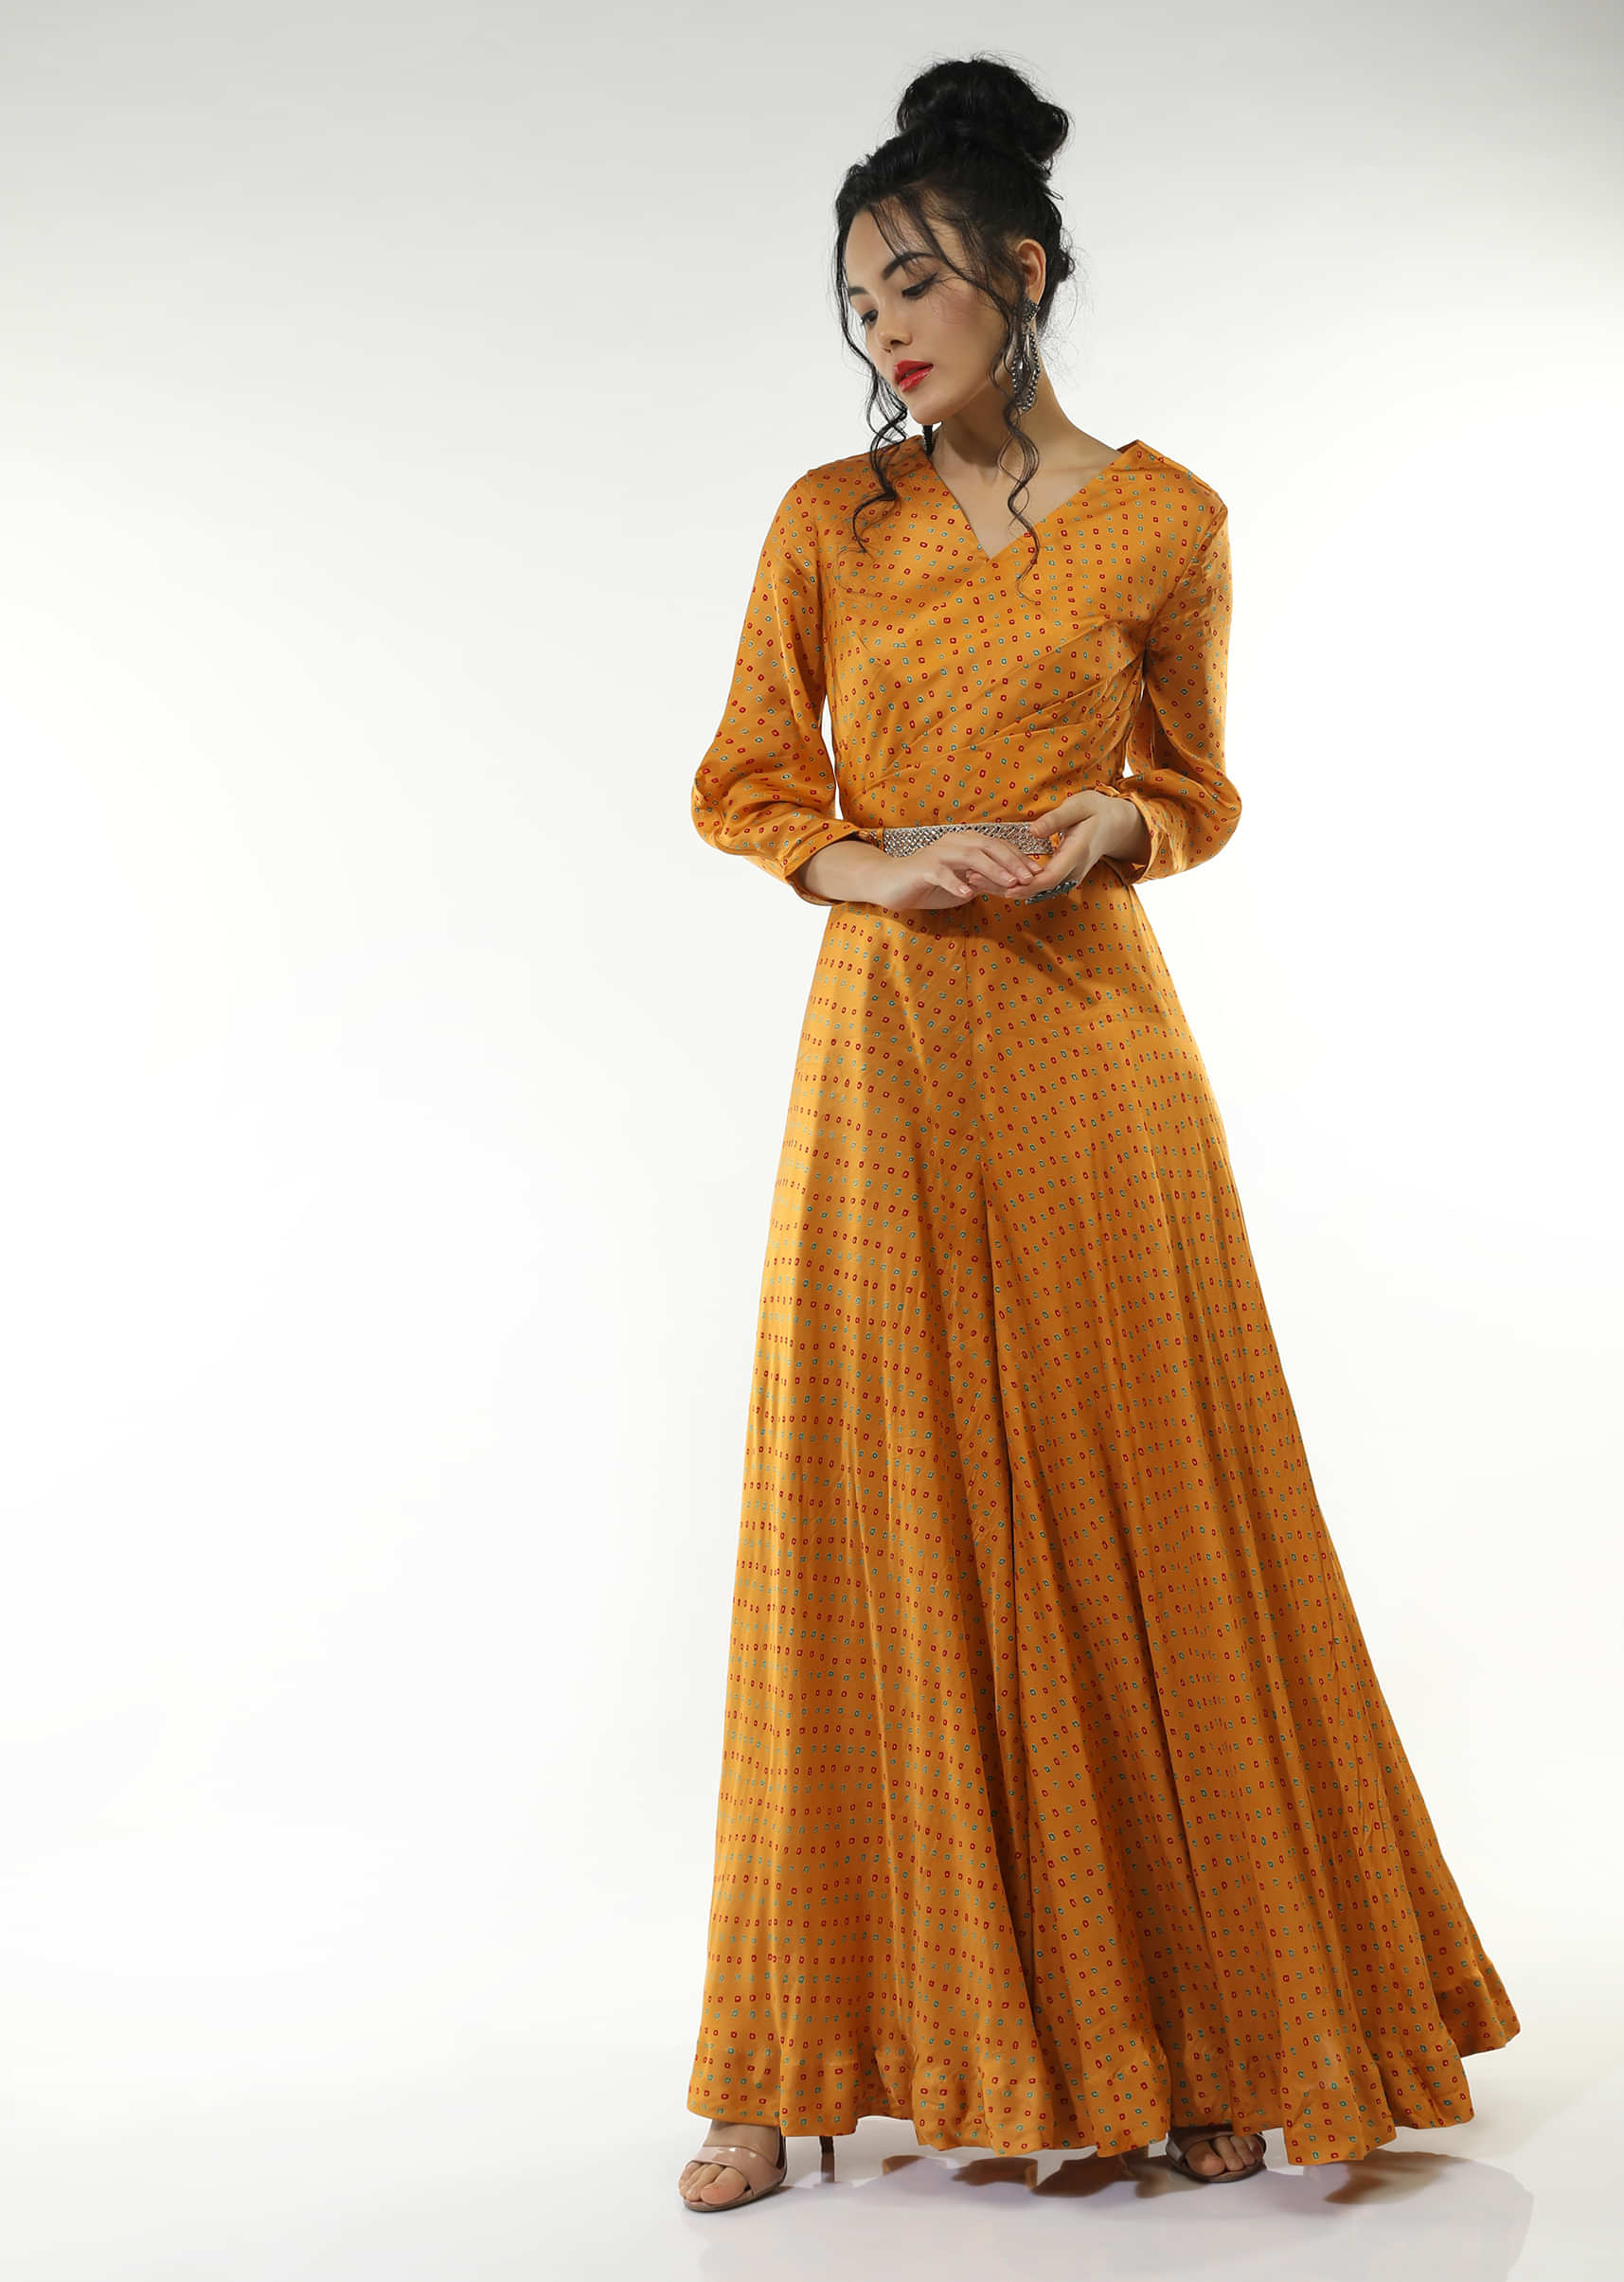 Honey Yellow Jumpsuit In Satin Blend With Bandhani Print All Over And An Overlapping Pleated Bodice With A Mirror Belt  